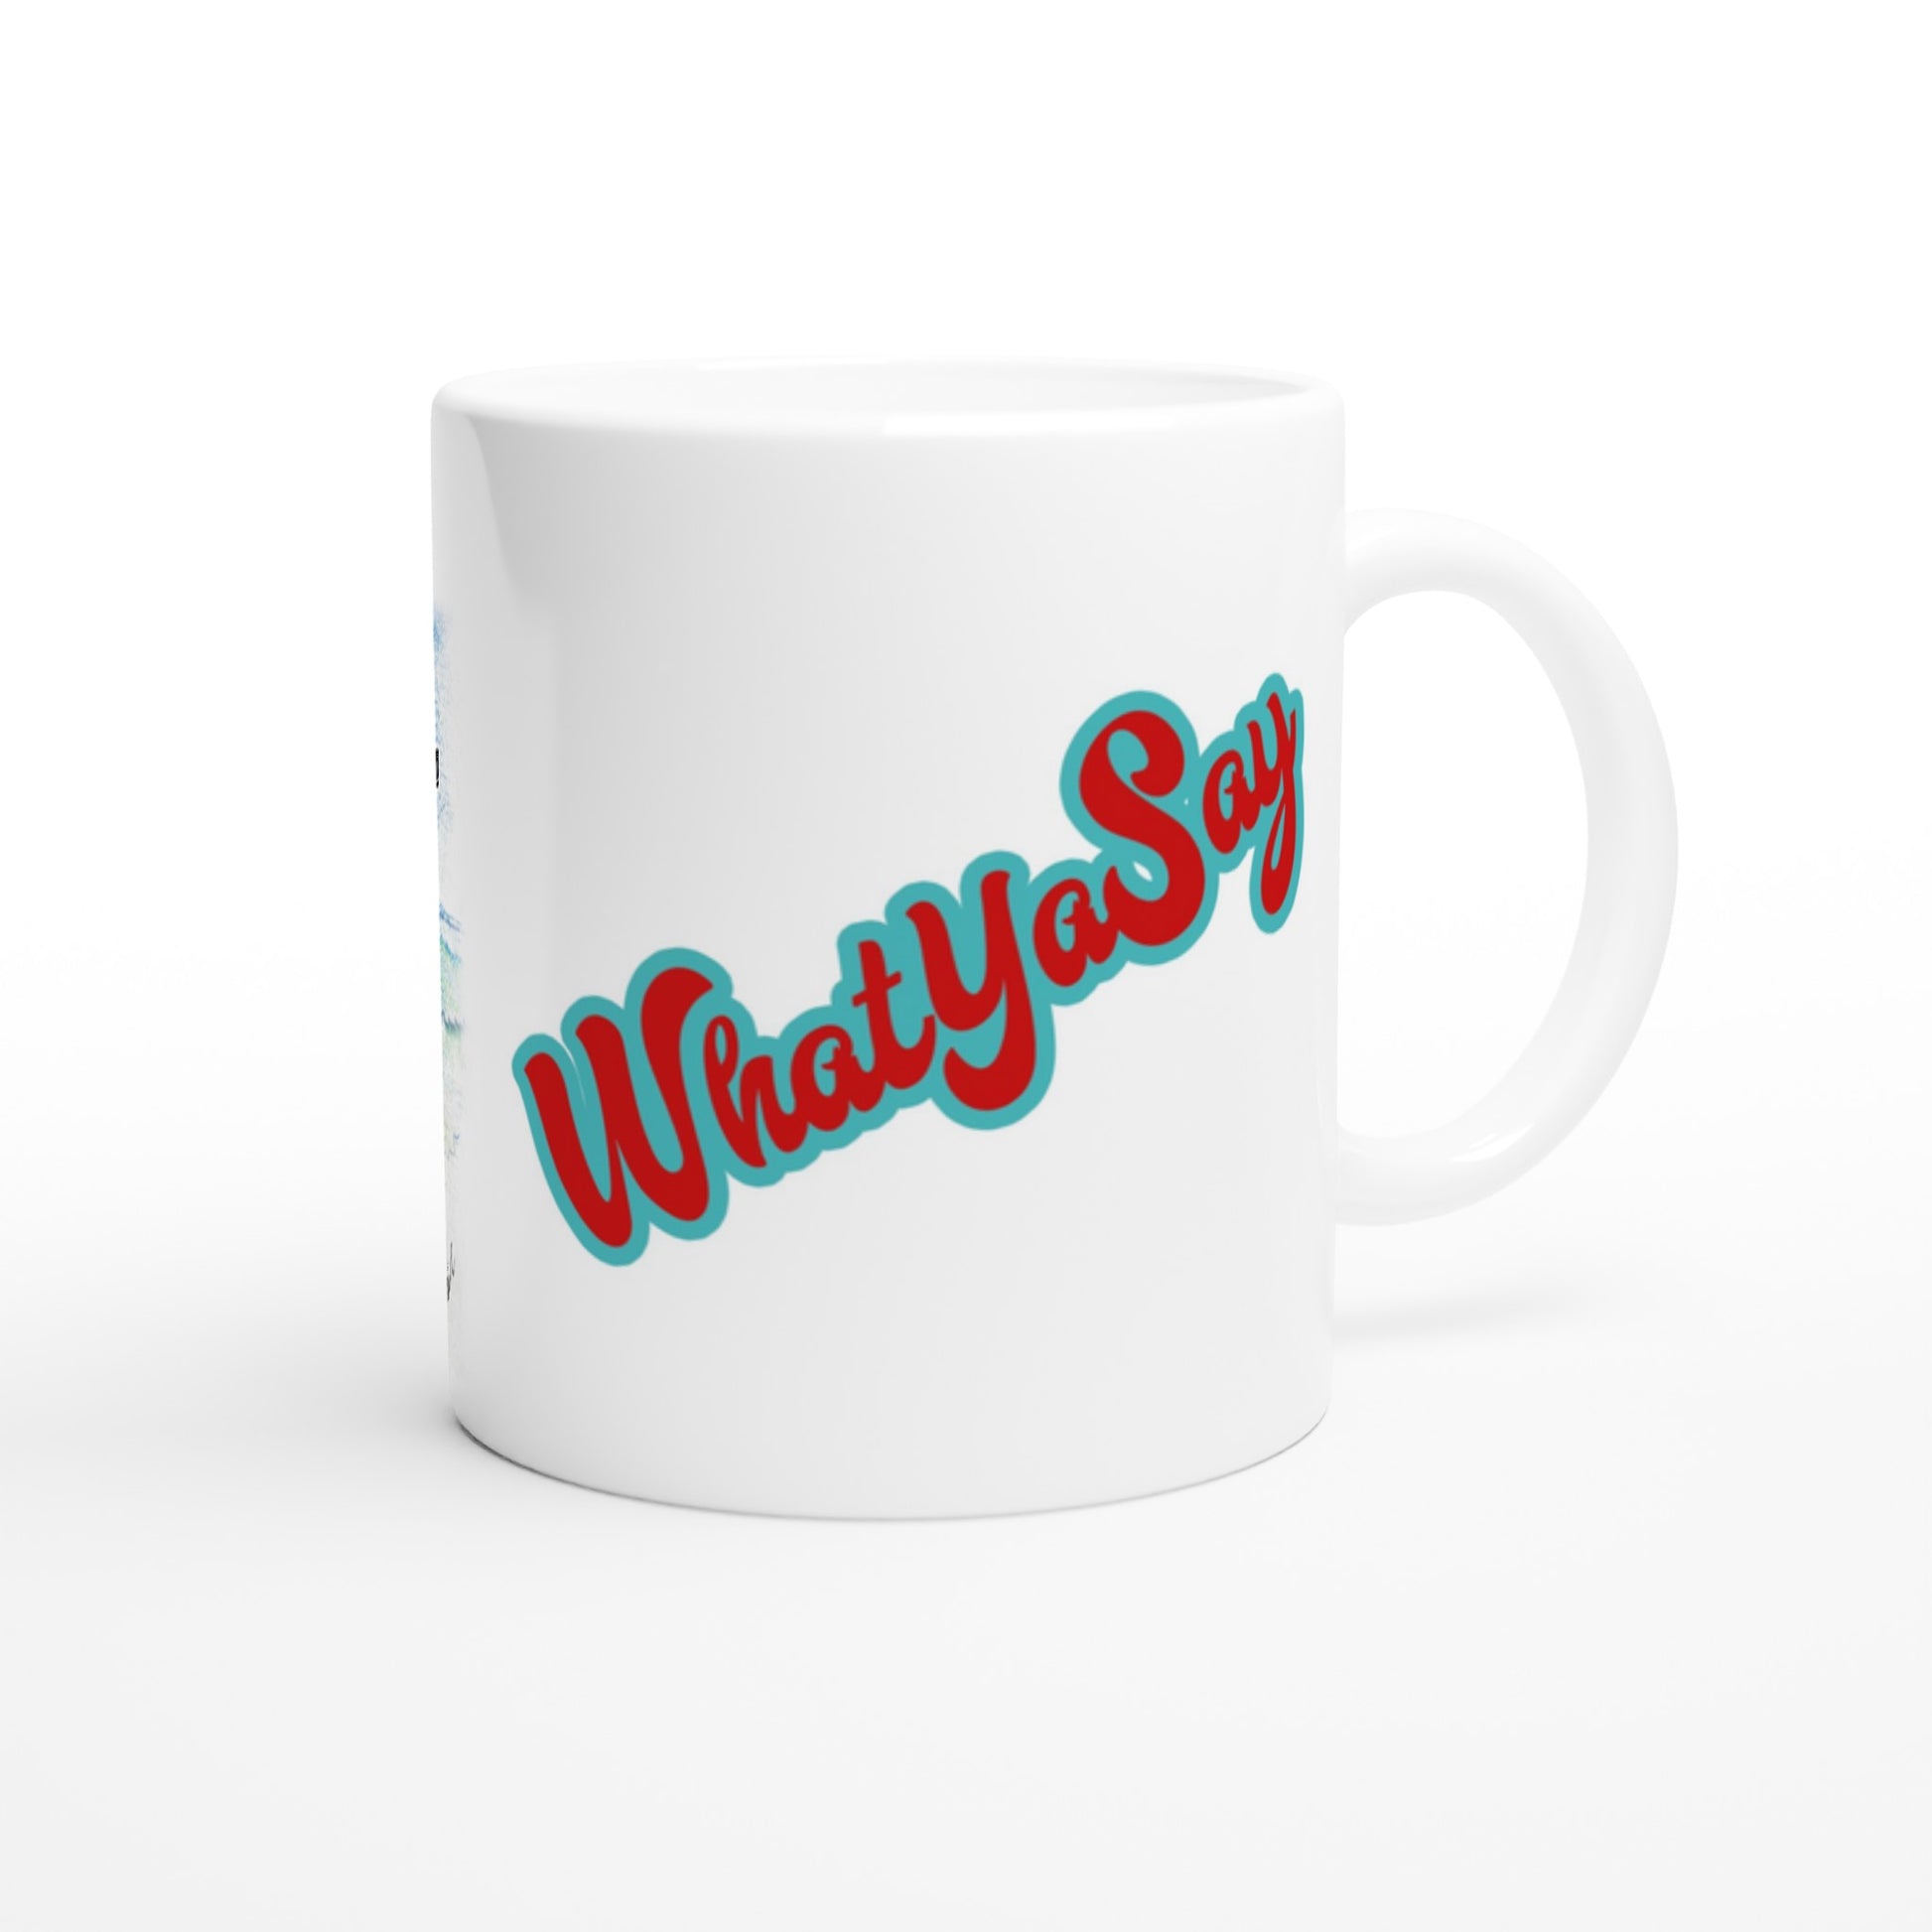 Personalized white ceramic 11oz mug with original personalized motto [Your Name] I need my Ass in the Sand and a Margarita in my hand on the front and WhatYa Say logo on the back dishwasher and microwave safe ceramic coffee mug from WhatYa Say Apparel back view.